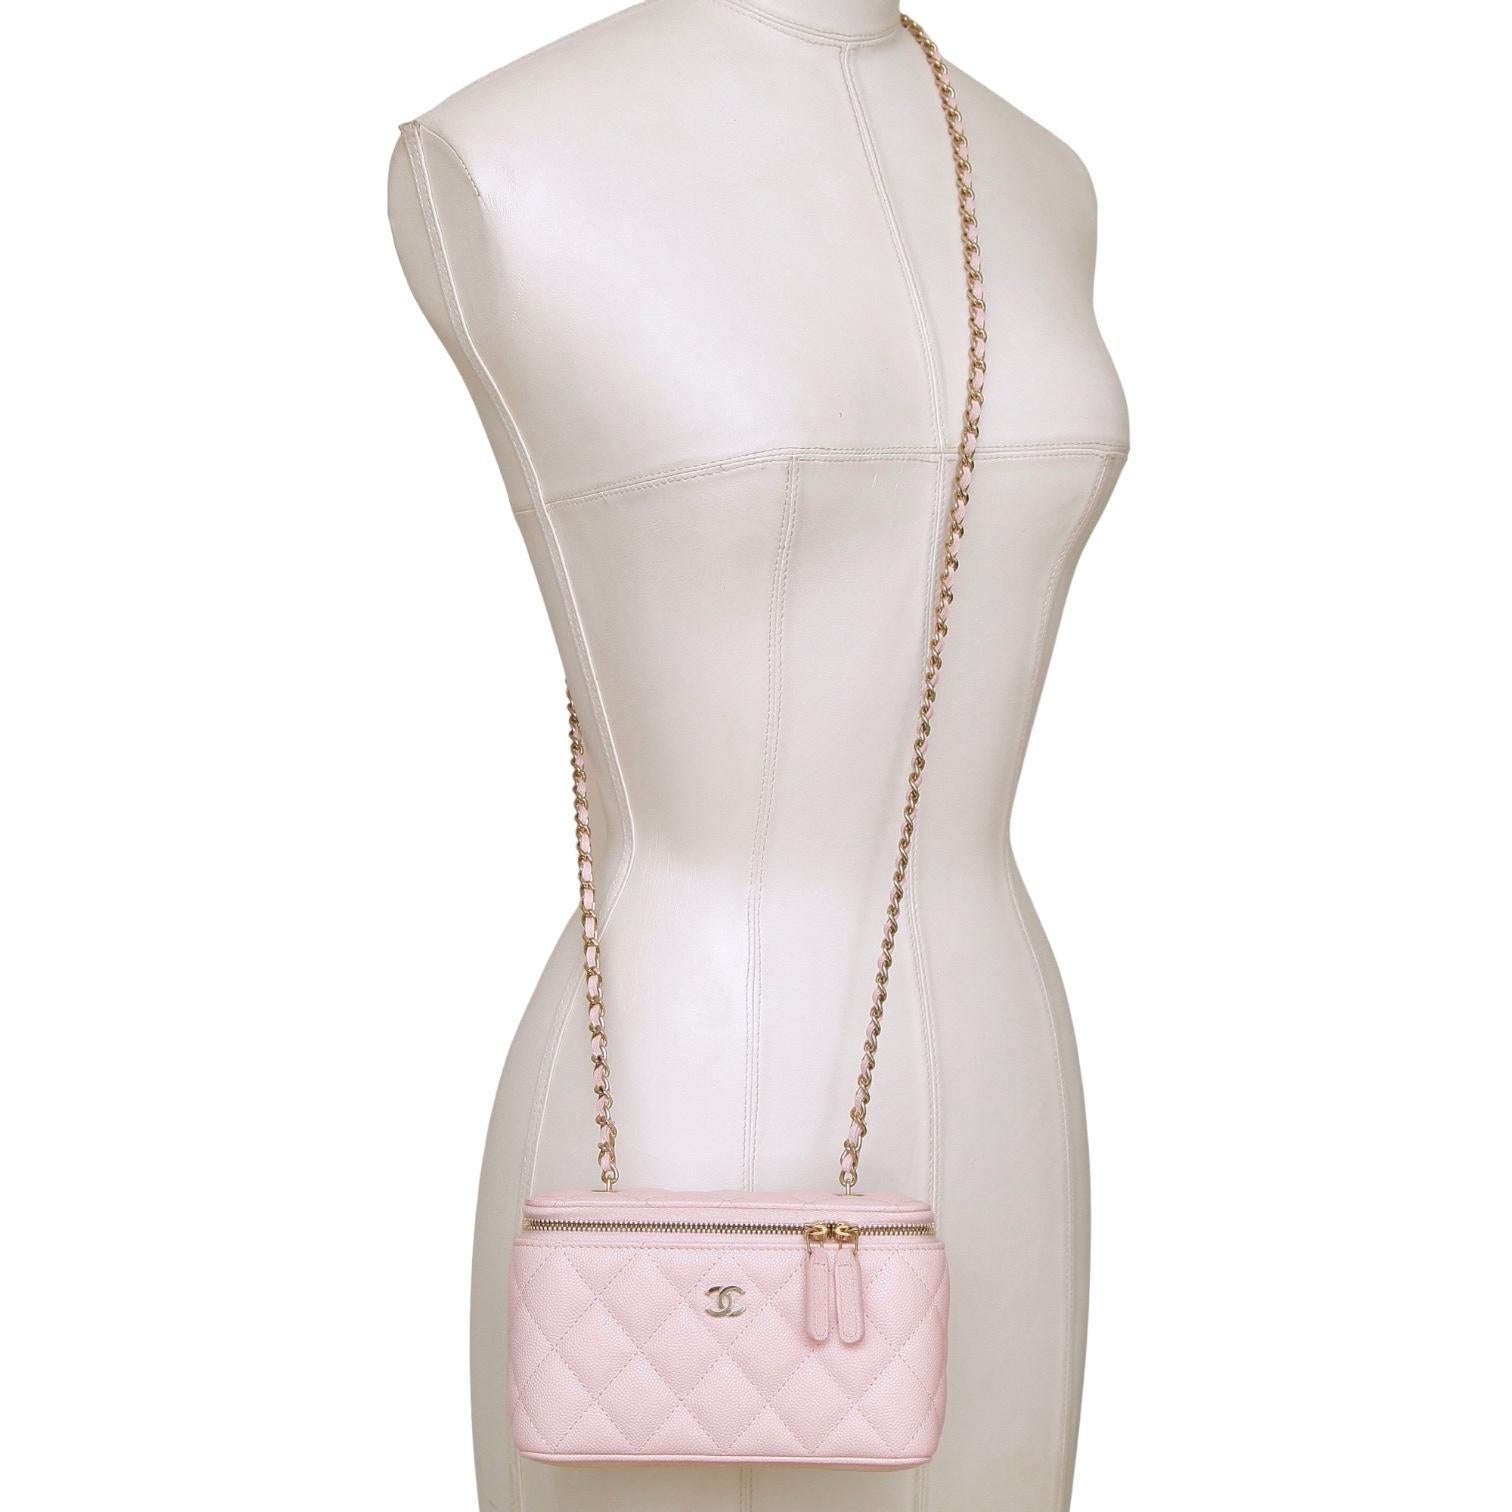 CHANEL LIGHT PINK CAVIAR VANITY CASE CROSSBODY BAG

Design: 
  - Light pink caviar quilted leather.
   - Leather/gold hardware chain crossbody shoulder strap.
  - Gold hardware CC logo at front.
  - 3/4 wrap-around top zipper closure.
  - Large CC